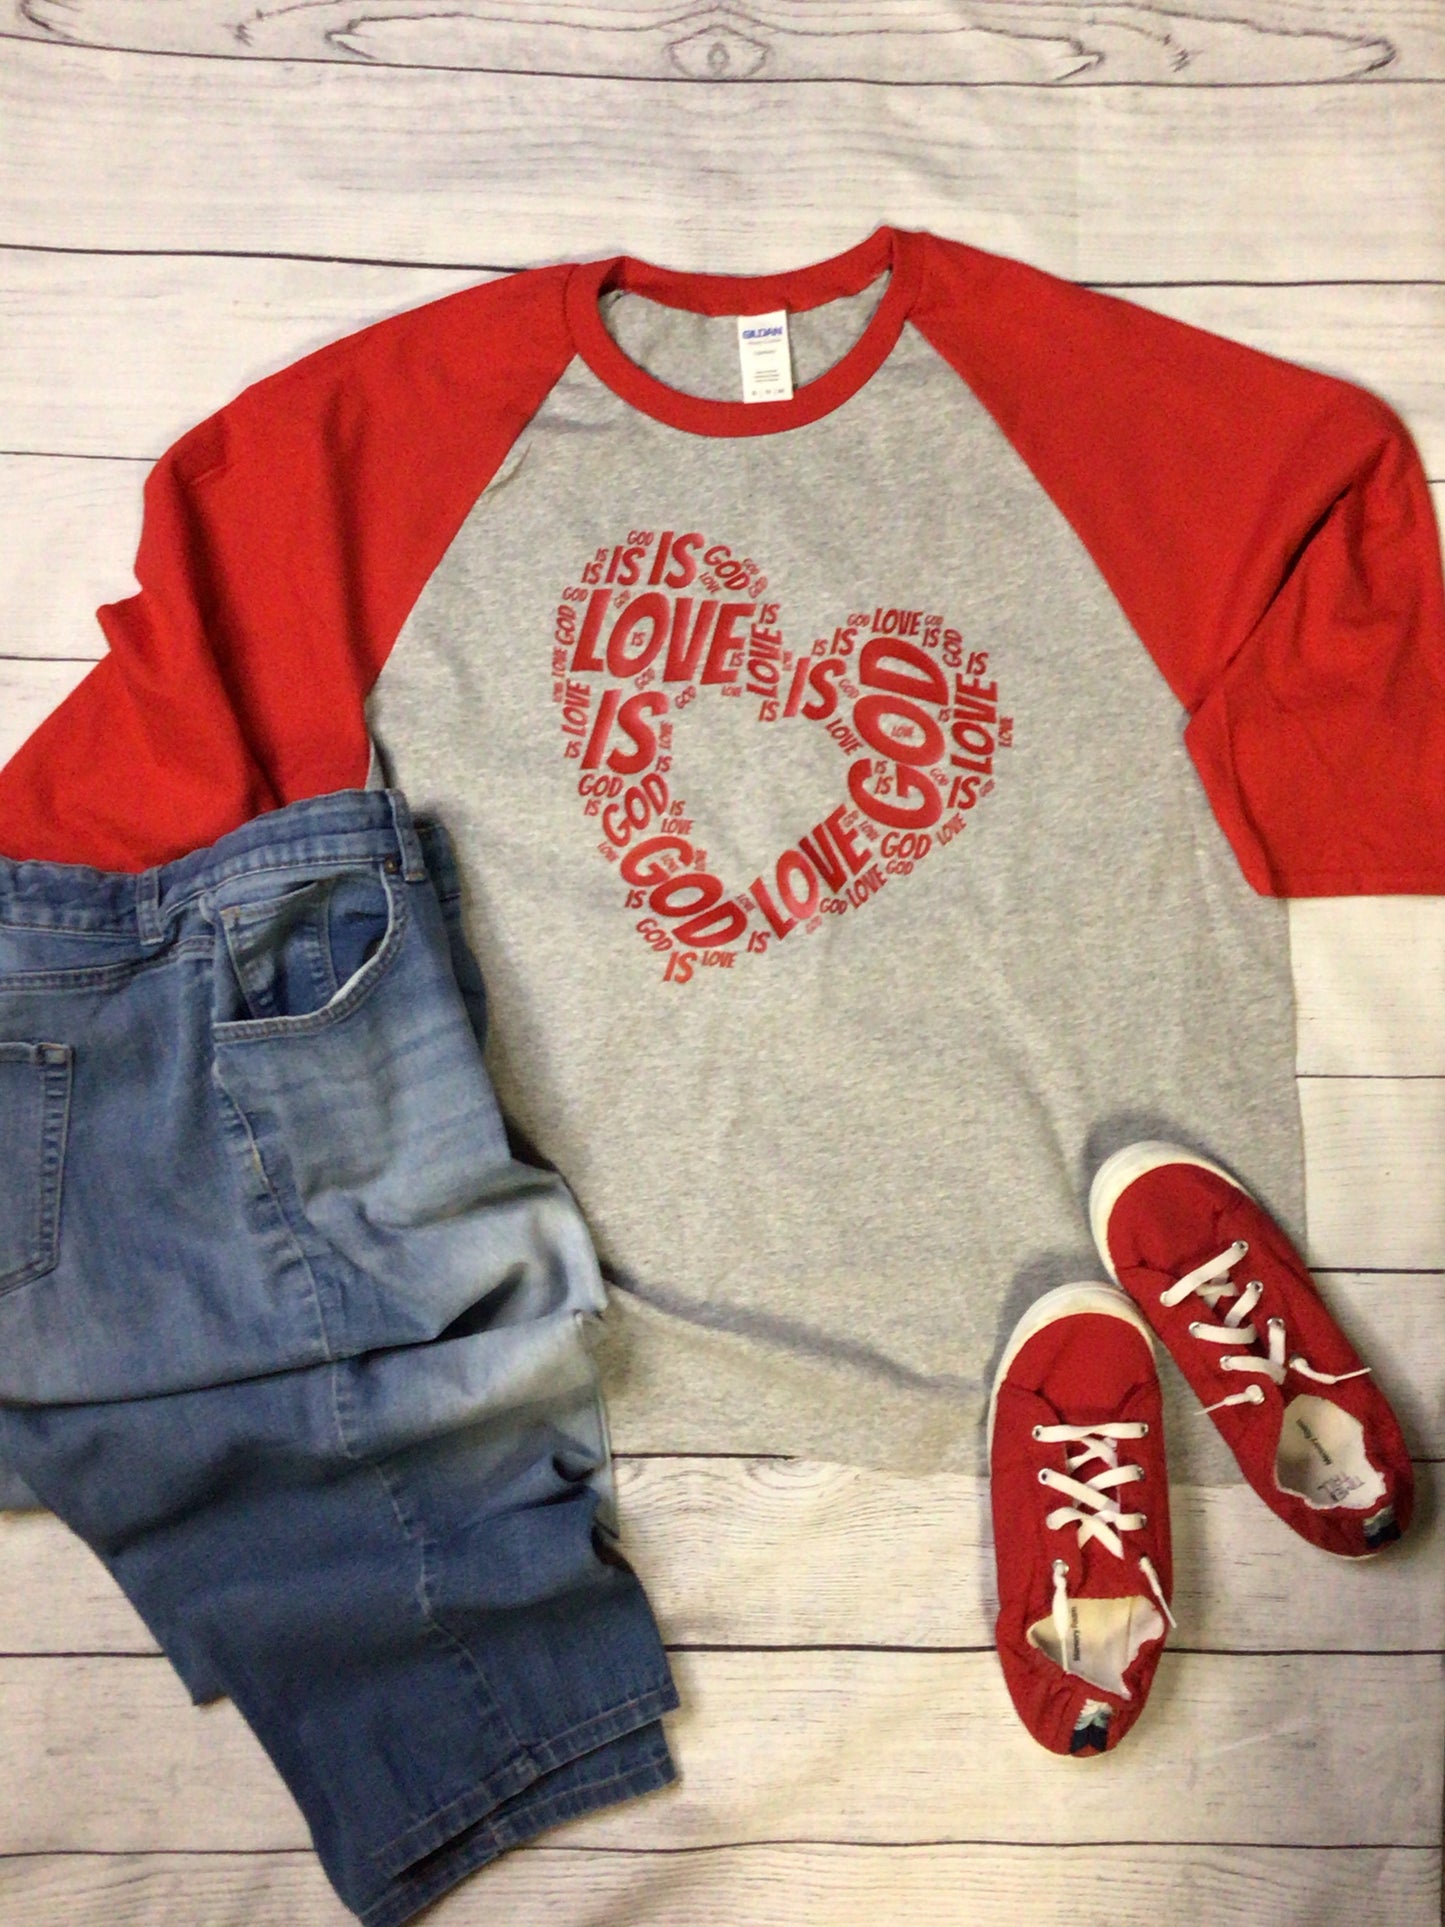 “God is Love” in a heart t-shirt